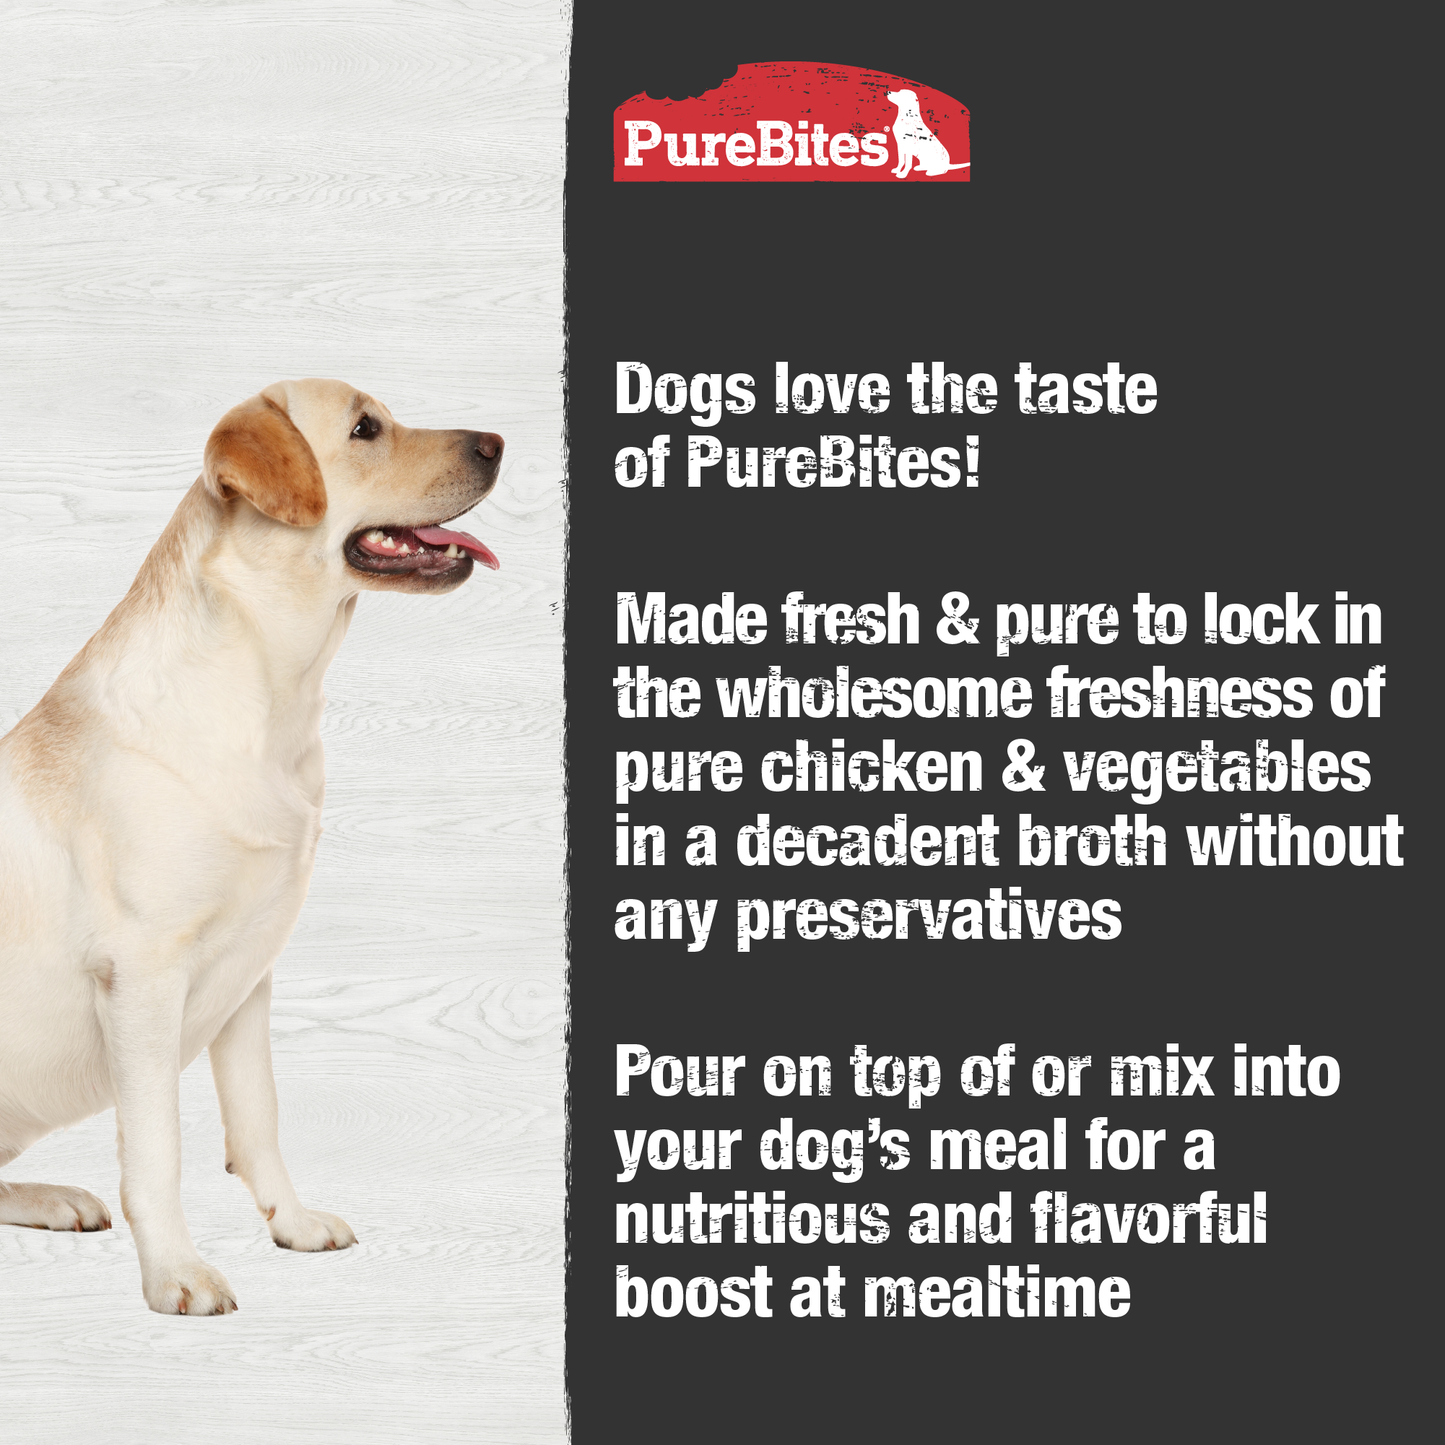 Made fresh & pure means more protein and nutrients packed into every pouch. With only chicken and vegetables in a rich broth, it provides superior nutrition and mirrors a dog's ancestral diet.